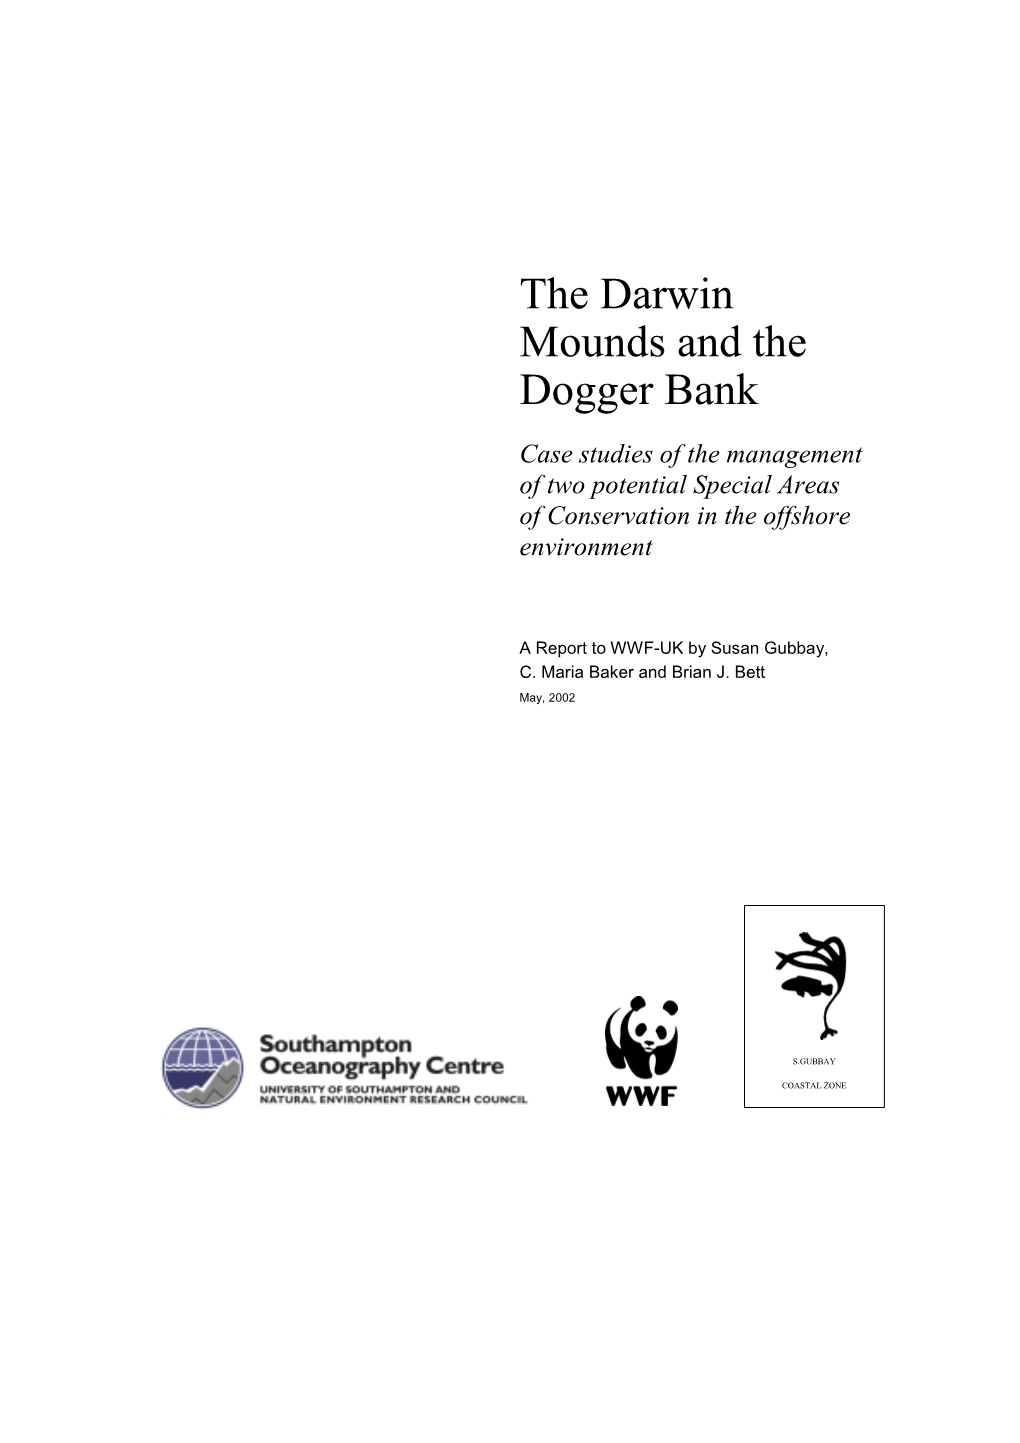 The Darwin Mounds and the Dogger Bank